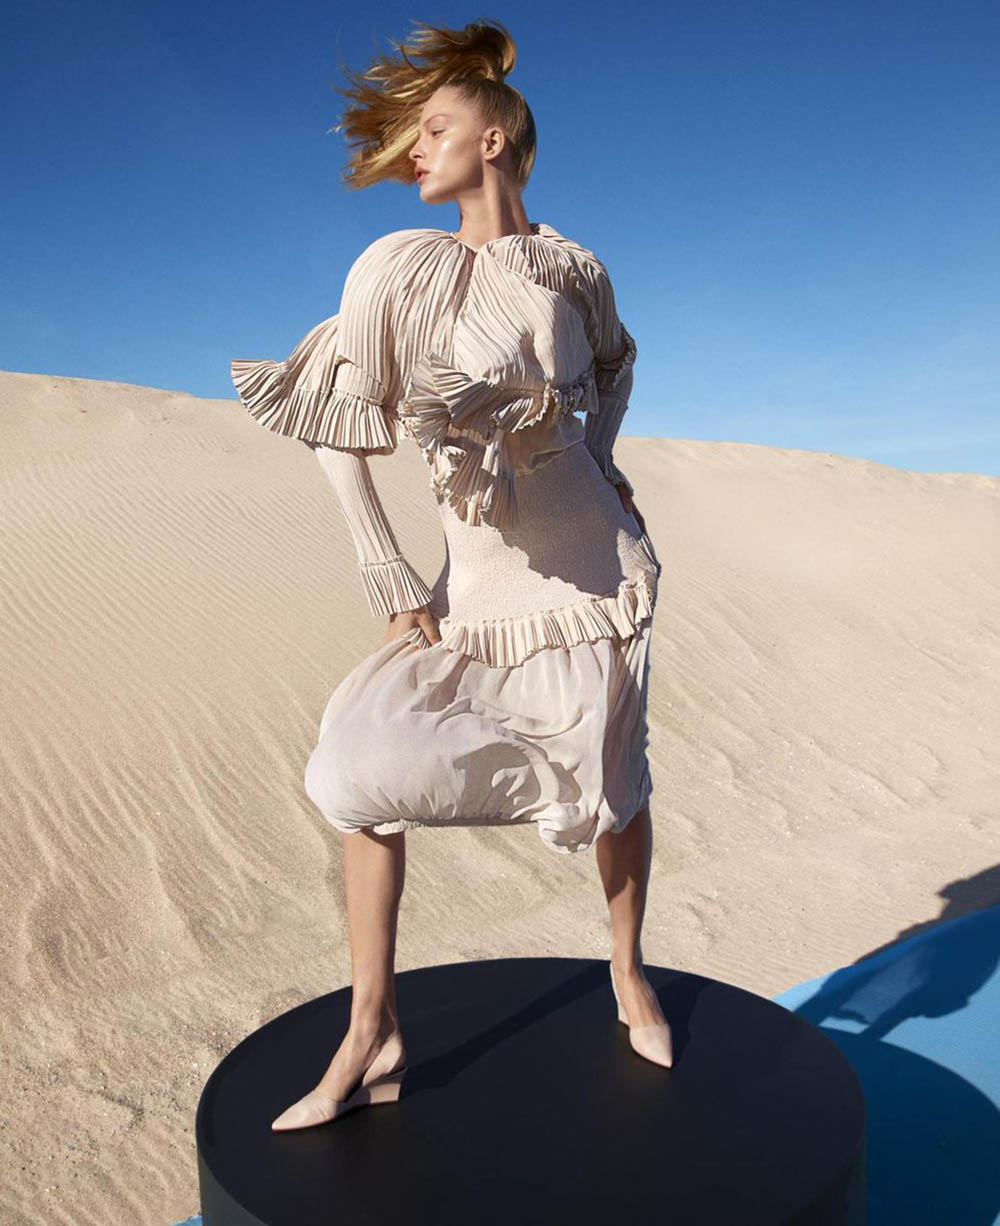 Abby Champion by Camilla Akrans for Harper’s Bazaar US April 2019